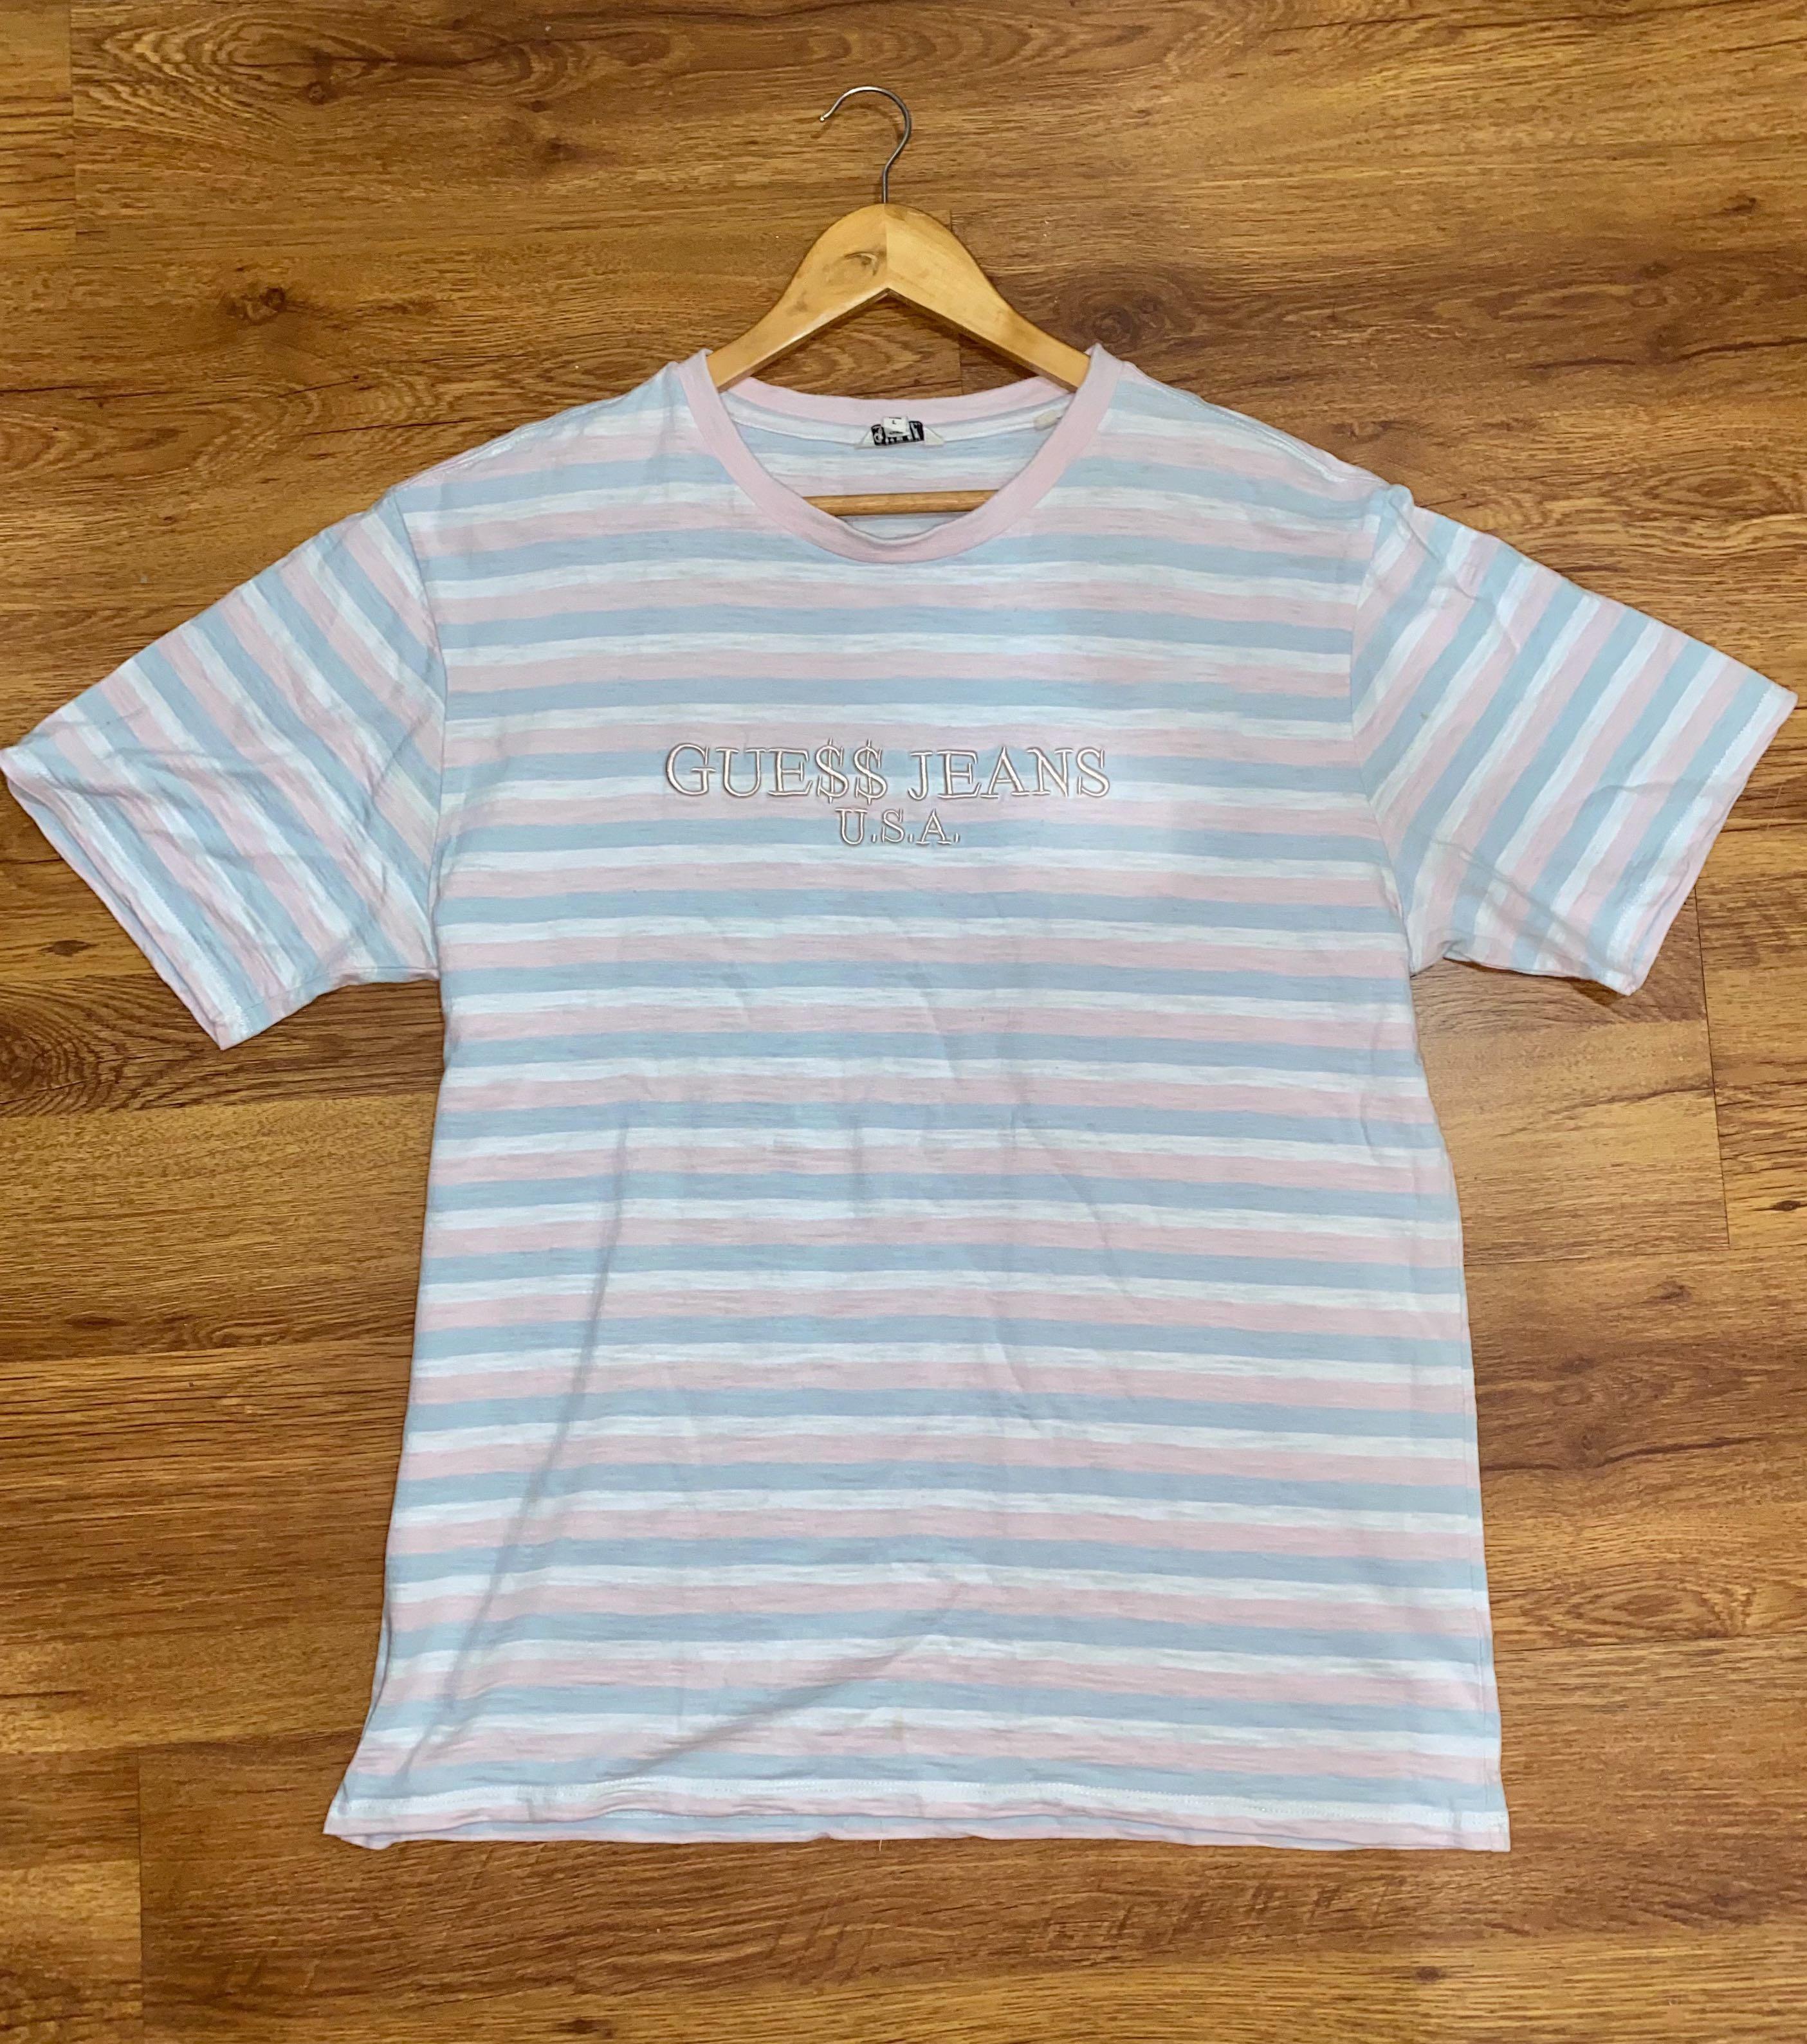 Guess x ASAP Rocky Cotton Candy Striped Tee, Men's Tops & Sets, Tshirts Polo on Carousell